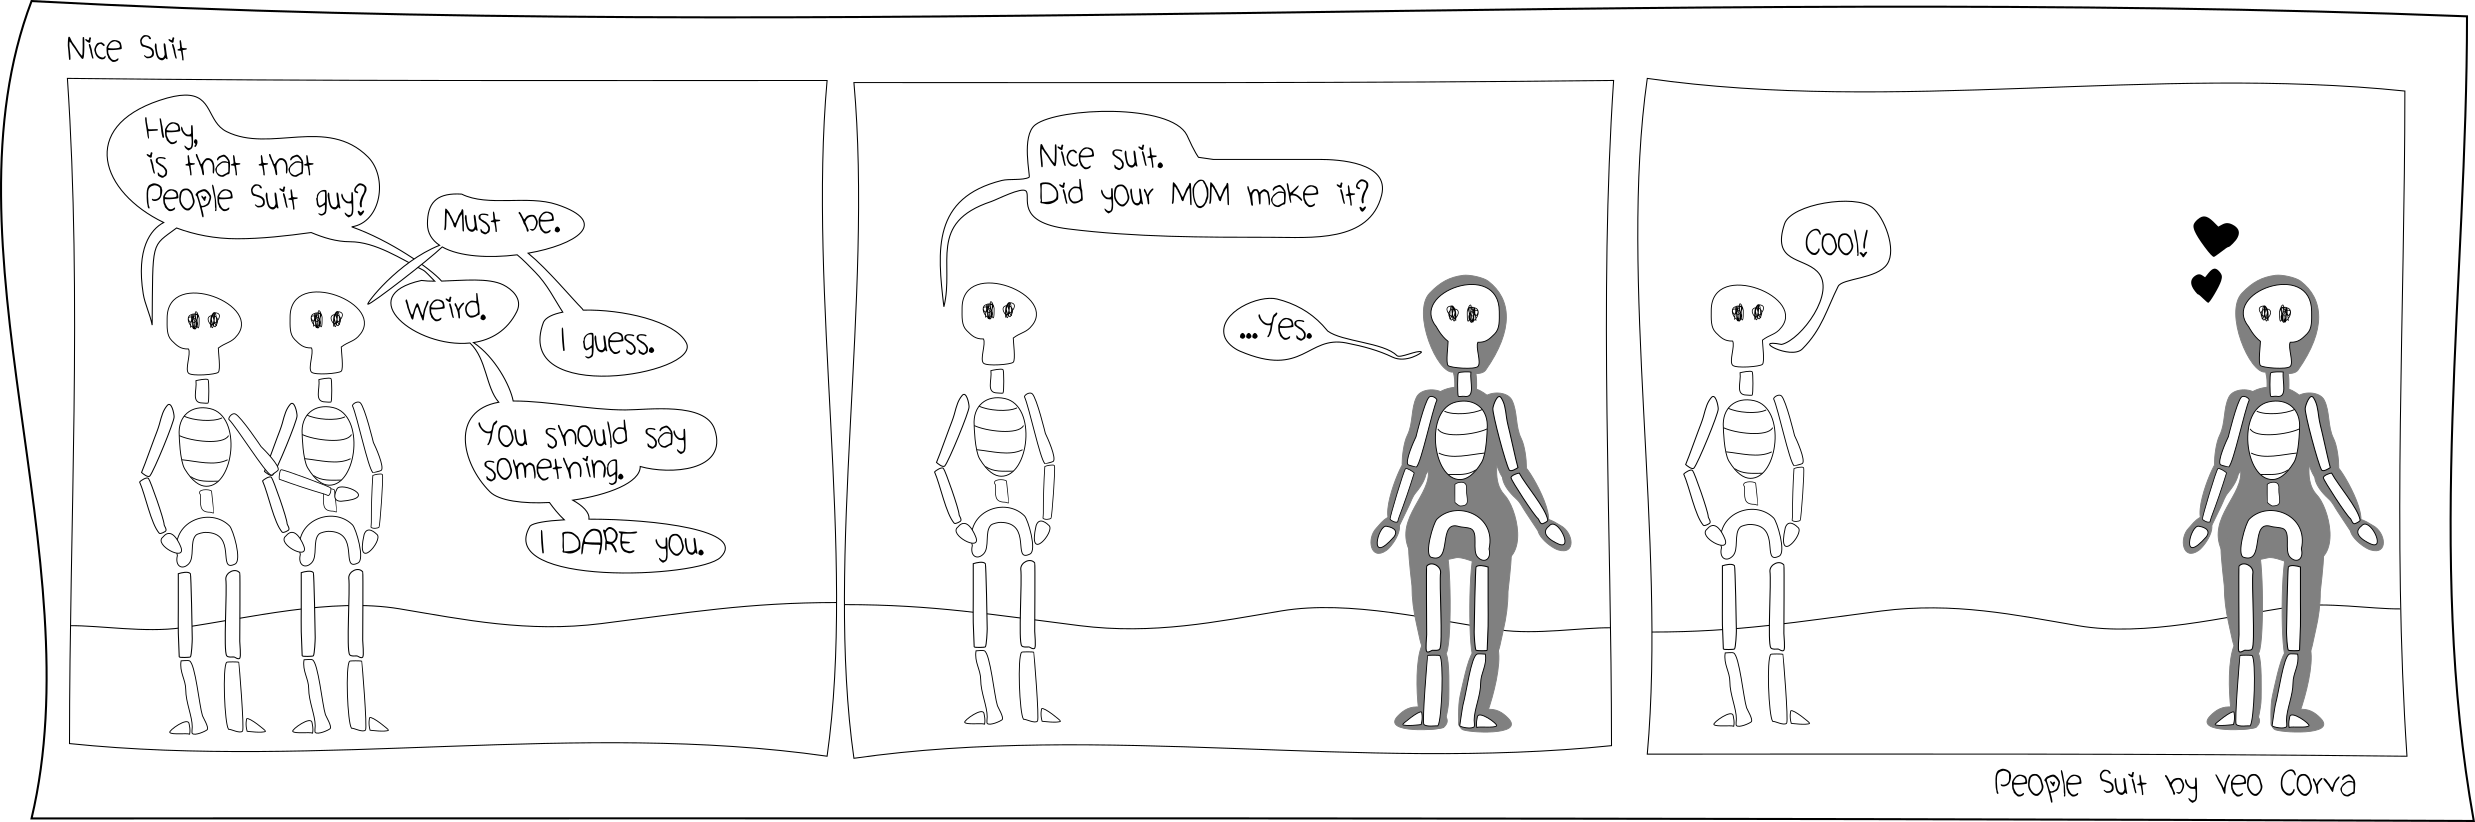 Two skeletons are looking at someone out of frame. Skeleton 1: 'Hey, is that that People Suit guy?' Skeleton 2: 'Yeah, must be.' Skeleton 1: 'Weird.' Skeleton 2: 'I guess'. Skeleton 1: 'You should say something. I dare you.' Next frame the dared skeleton goes to speak to another skeleton, this one in a silhouette of a human body: People Suit. 'Nice suit,' it says. 'Did your mom make it?' People Suit: '... Yes.' Skeleton 2: 'Cool!' People Suit responds with a heart, pleased and surprised.